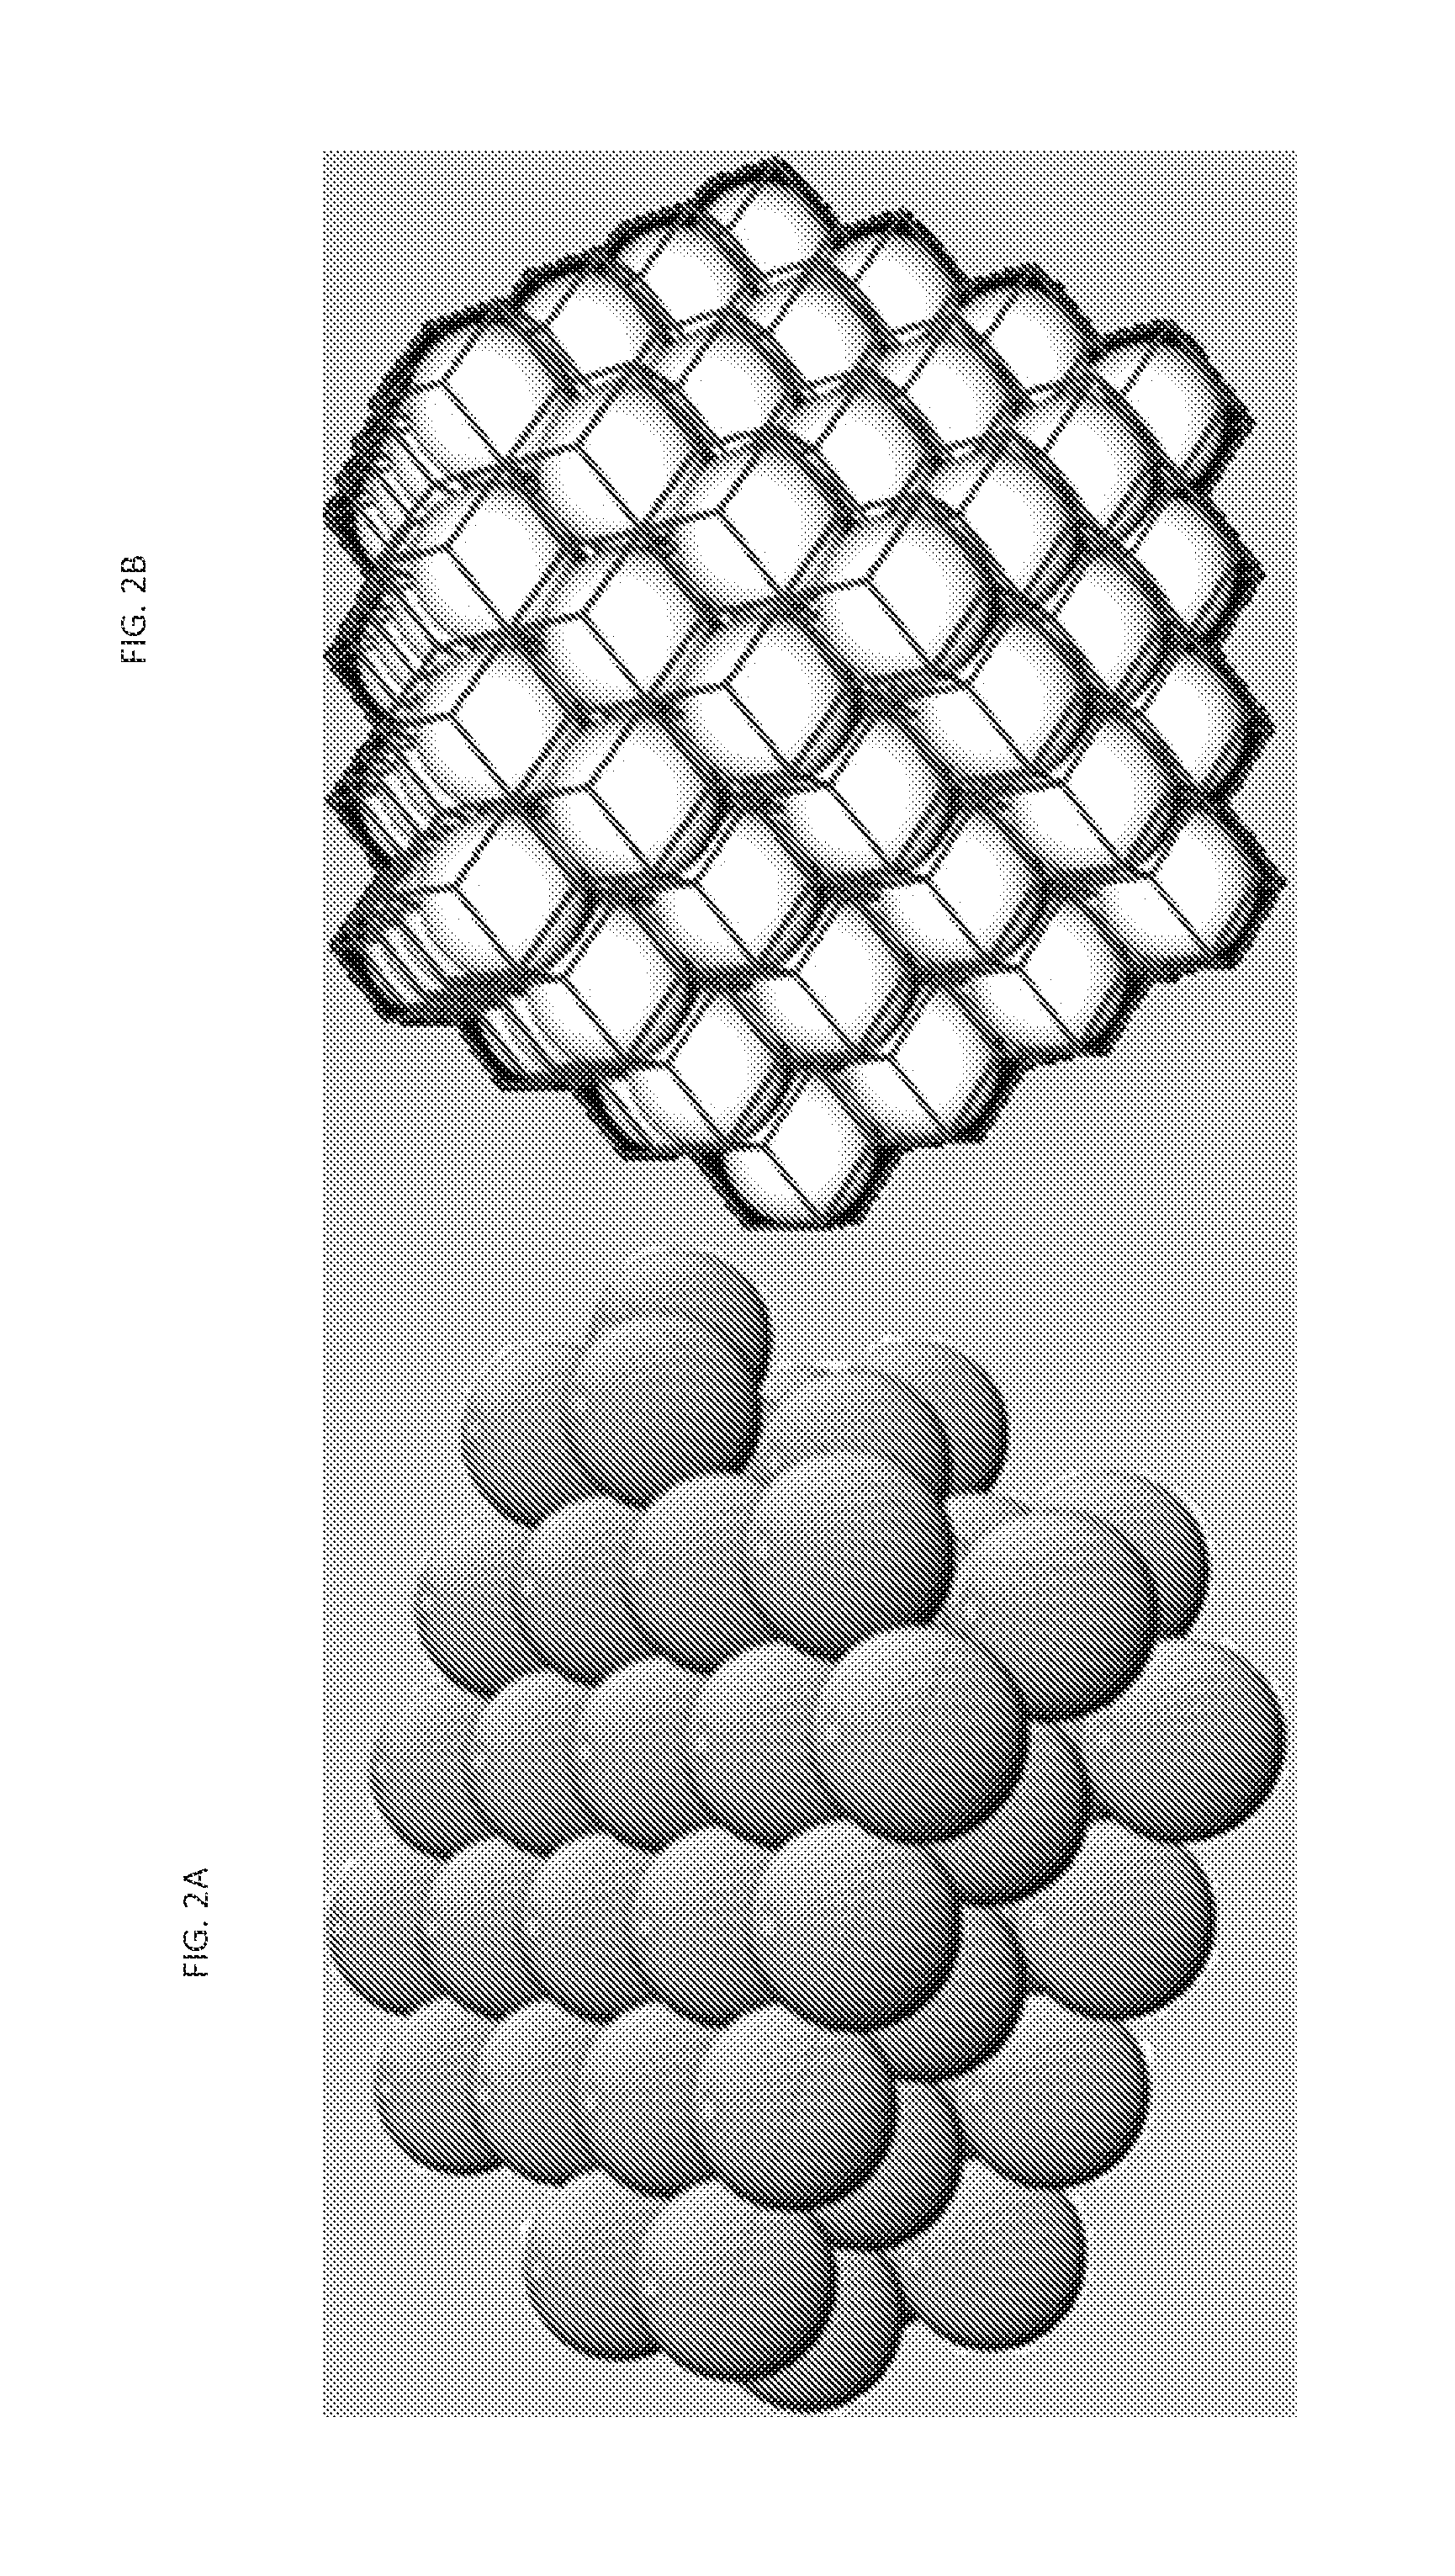 Foams made of amorphous hollow spheres and methods of manufacture thereof